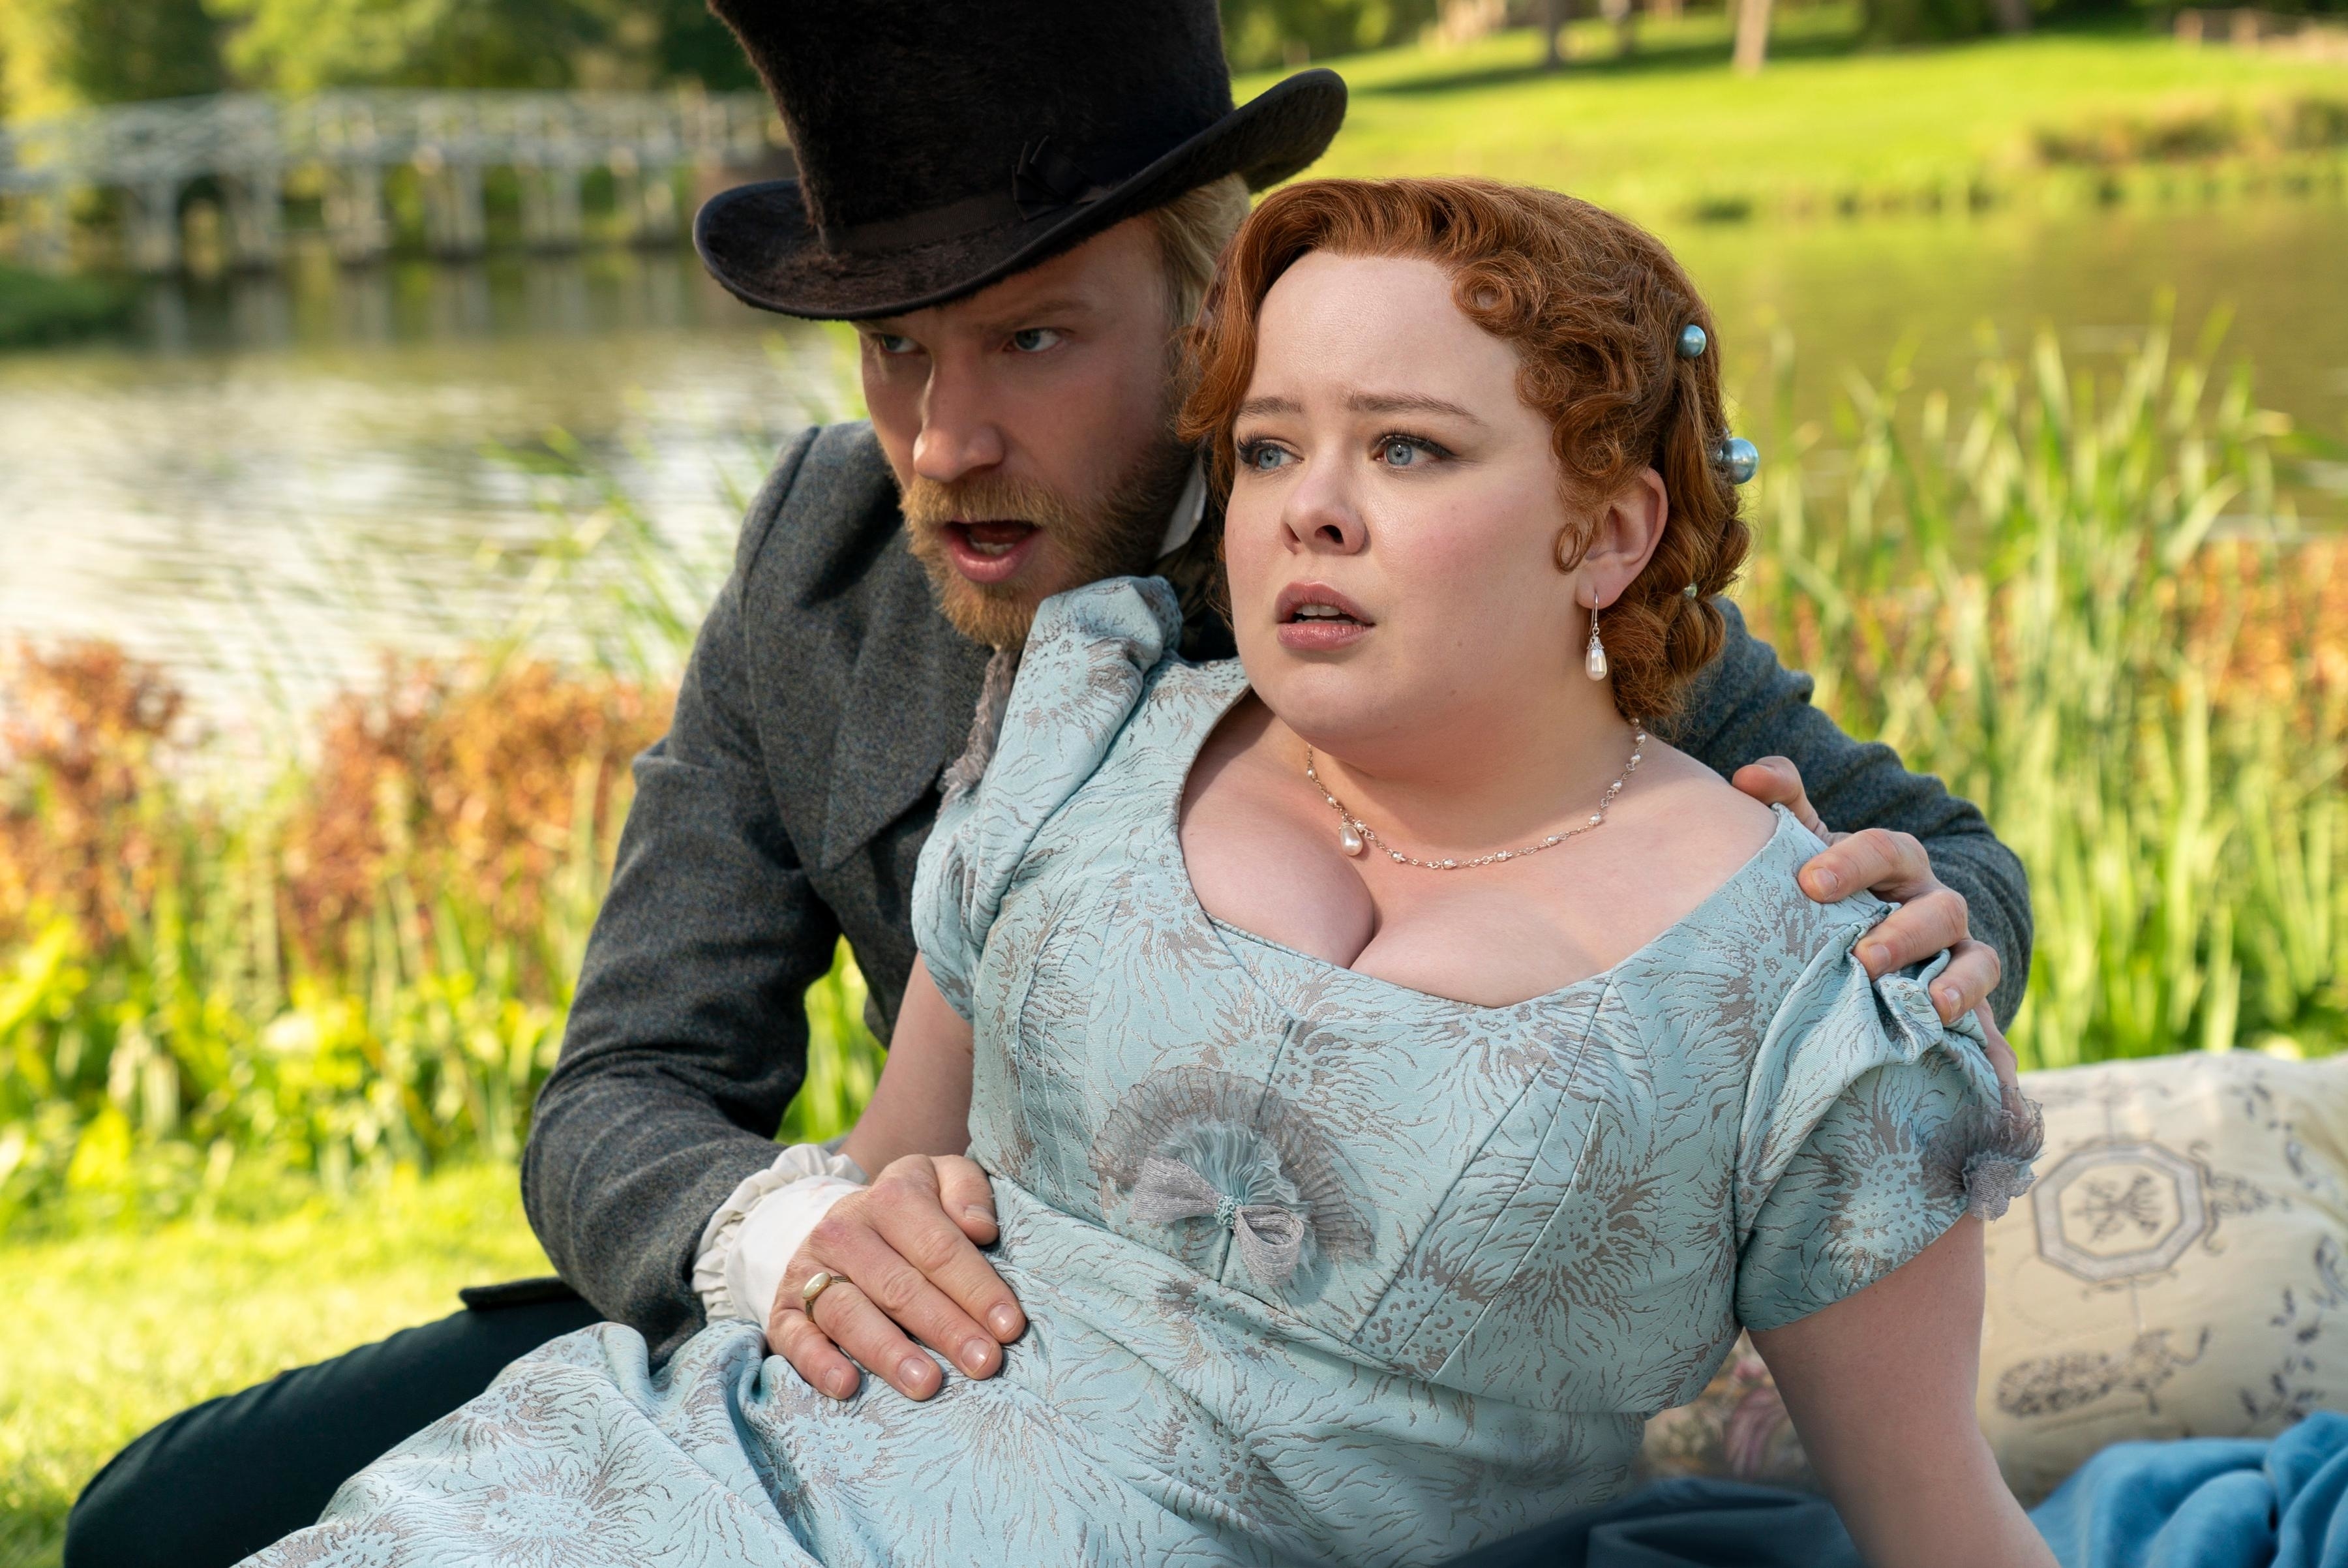 Two actors in period costume, the man in a top hat and the woman in a gown, engaged in a dramatic scene outdoors